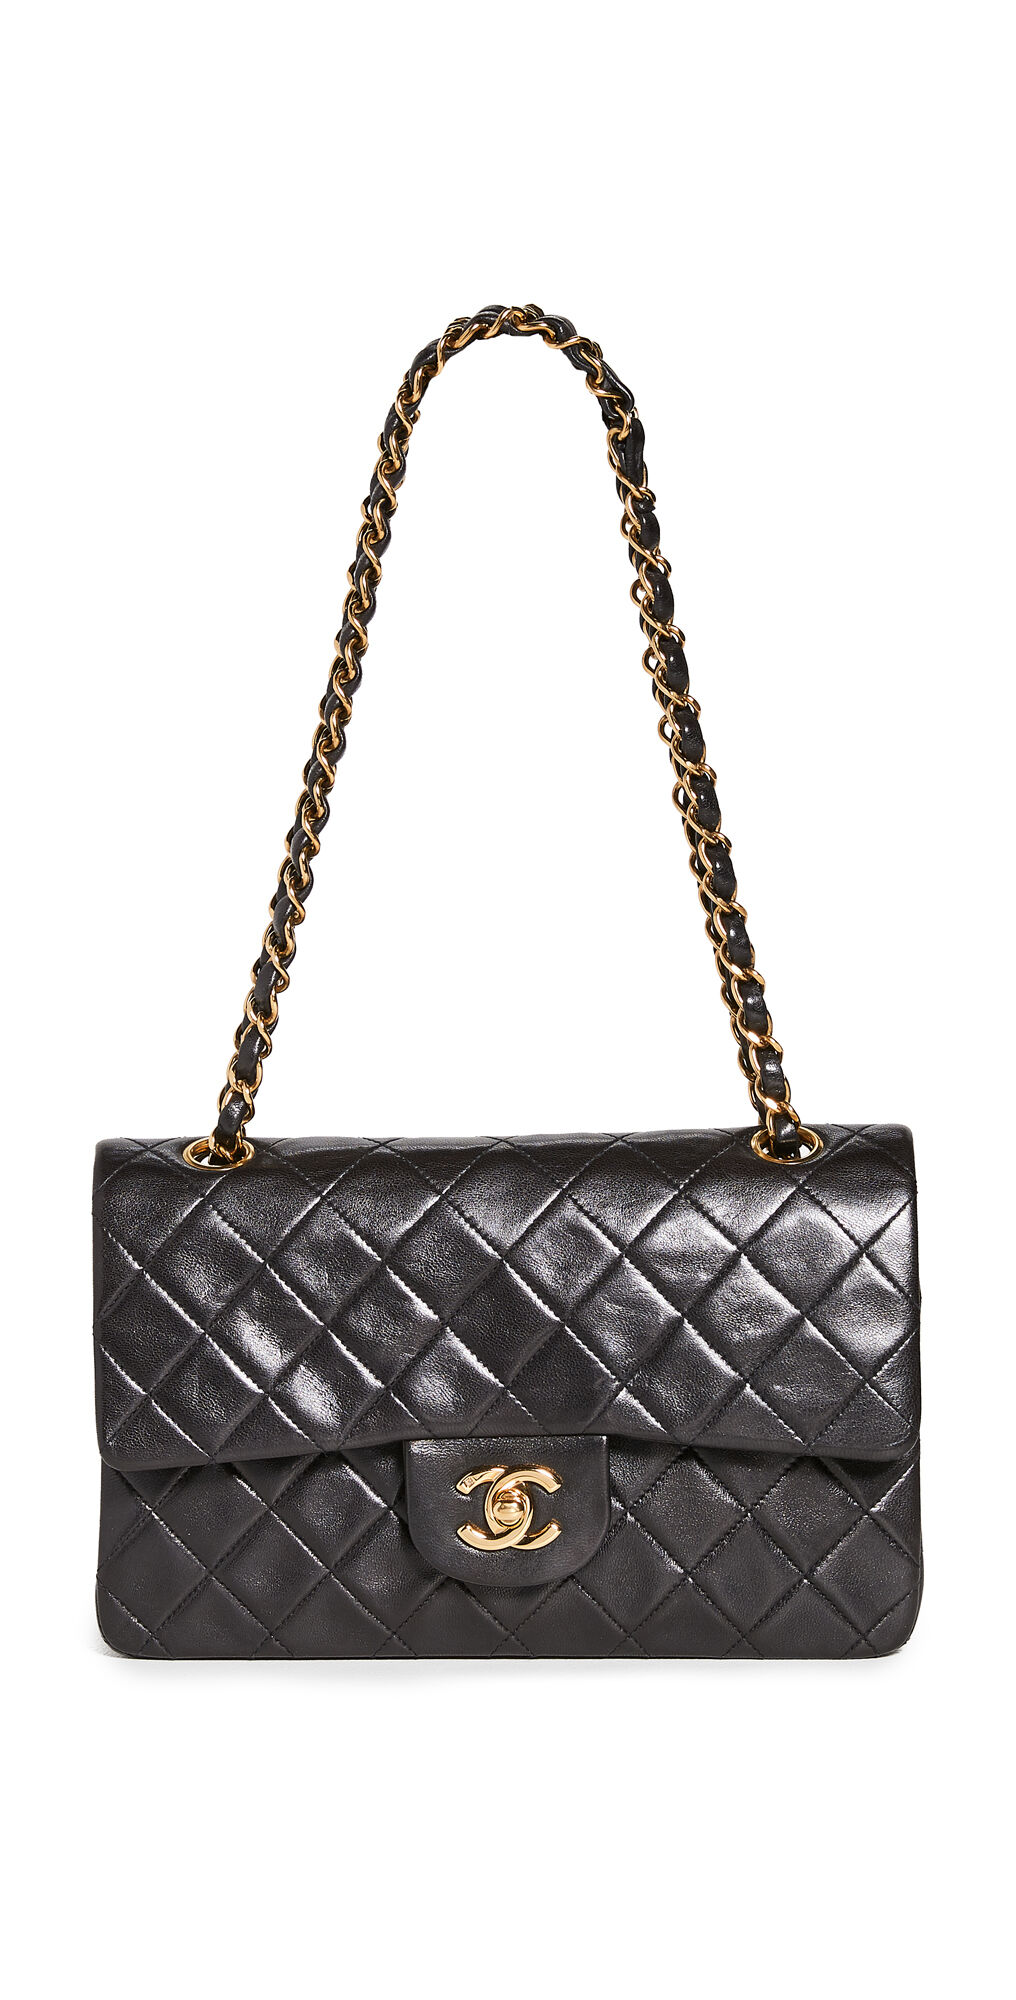 What Goes Around Comes Around Chanel Lambskin 2.55 9 Flap Bag" Black One Size  Black  size:One Size